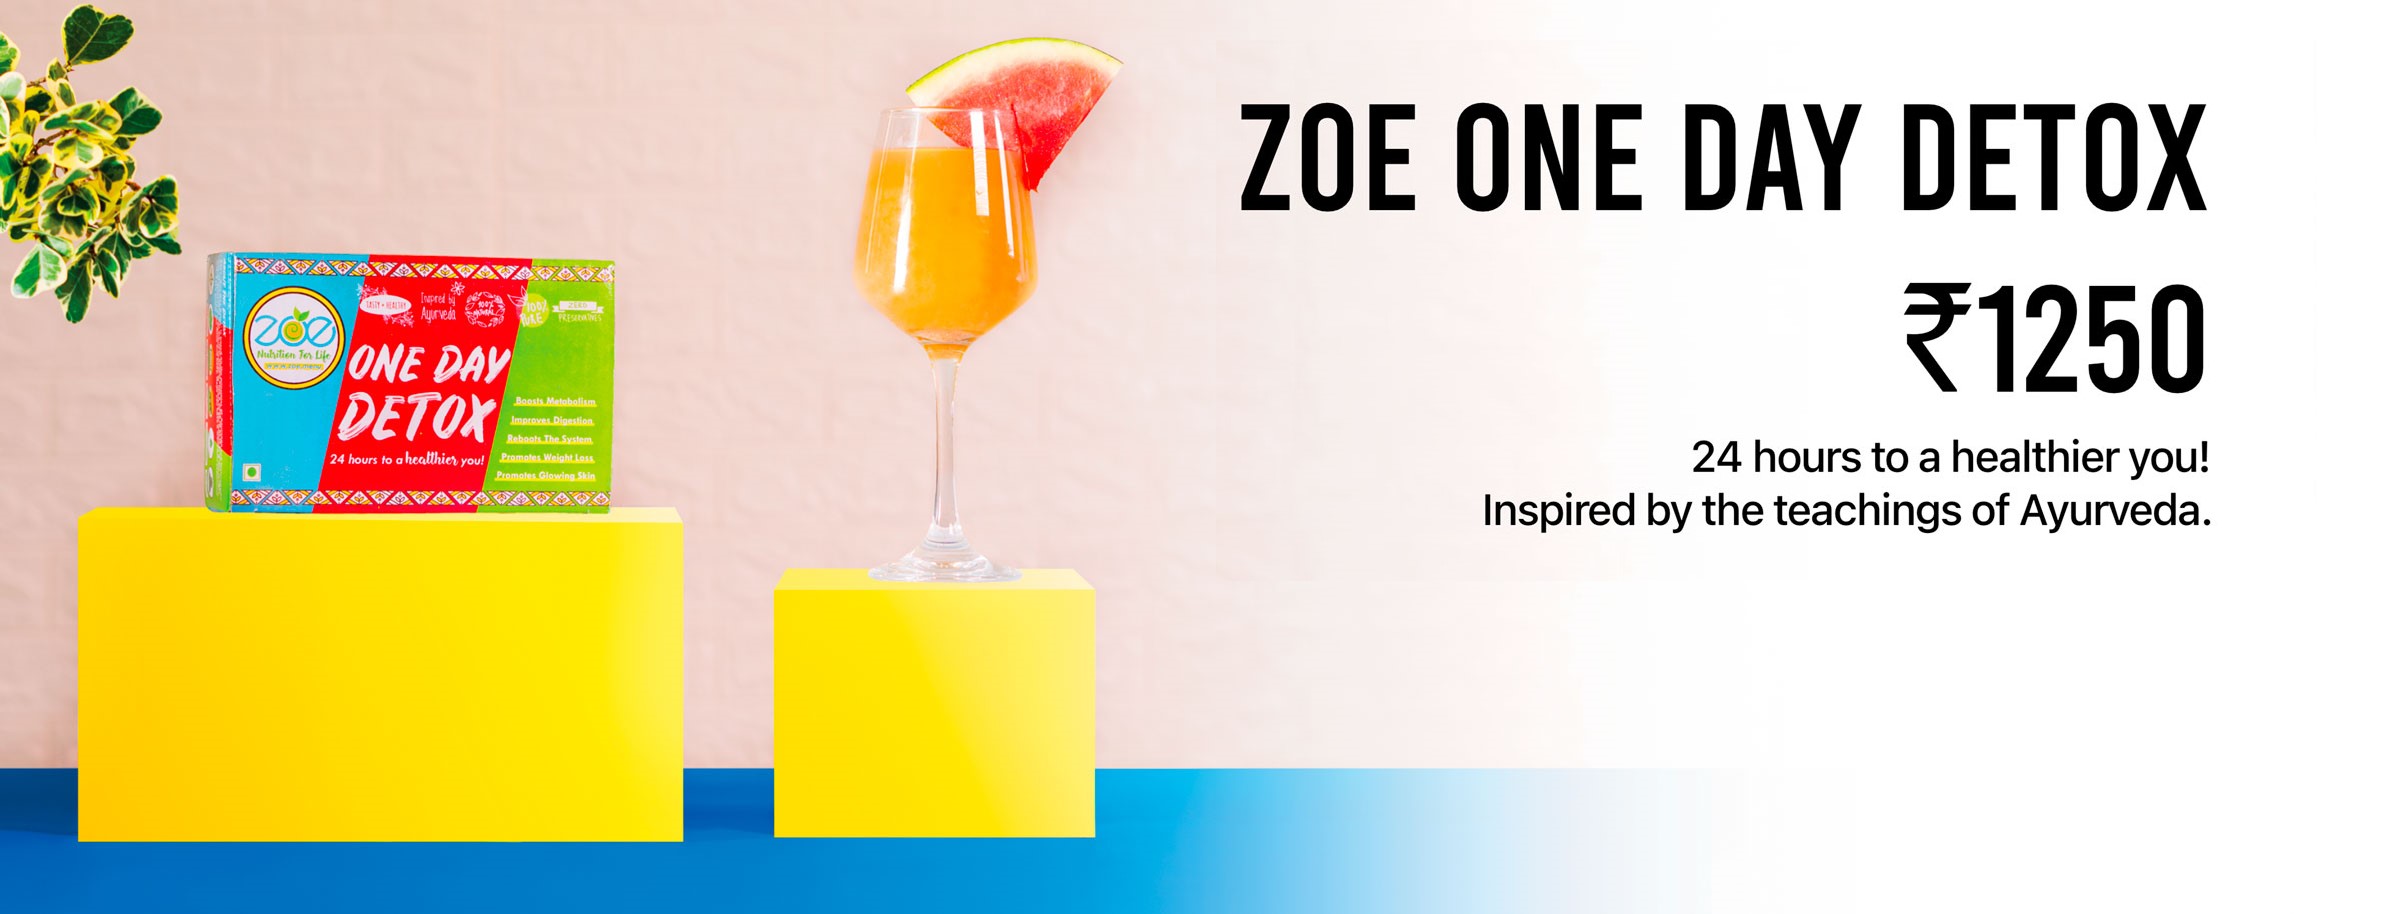 Zoe one day detox Rs. 1250. 24 hours to a healthier you! Inspired by the teachings of Ayurveda.